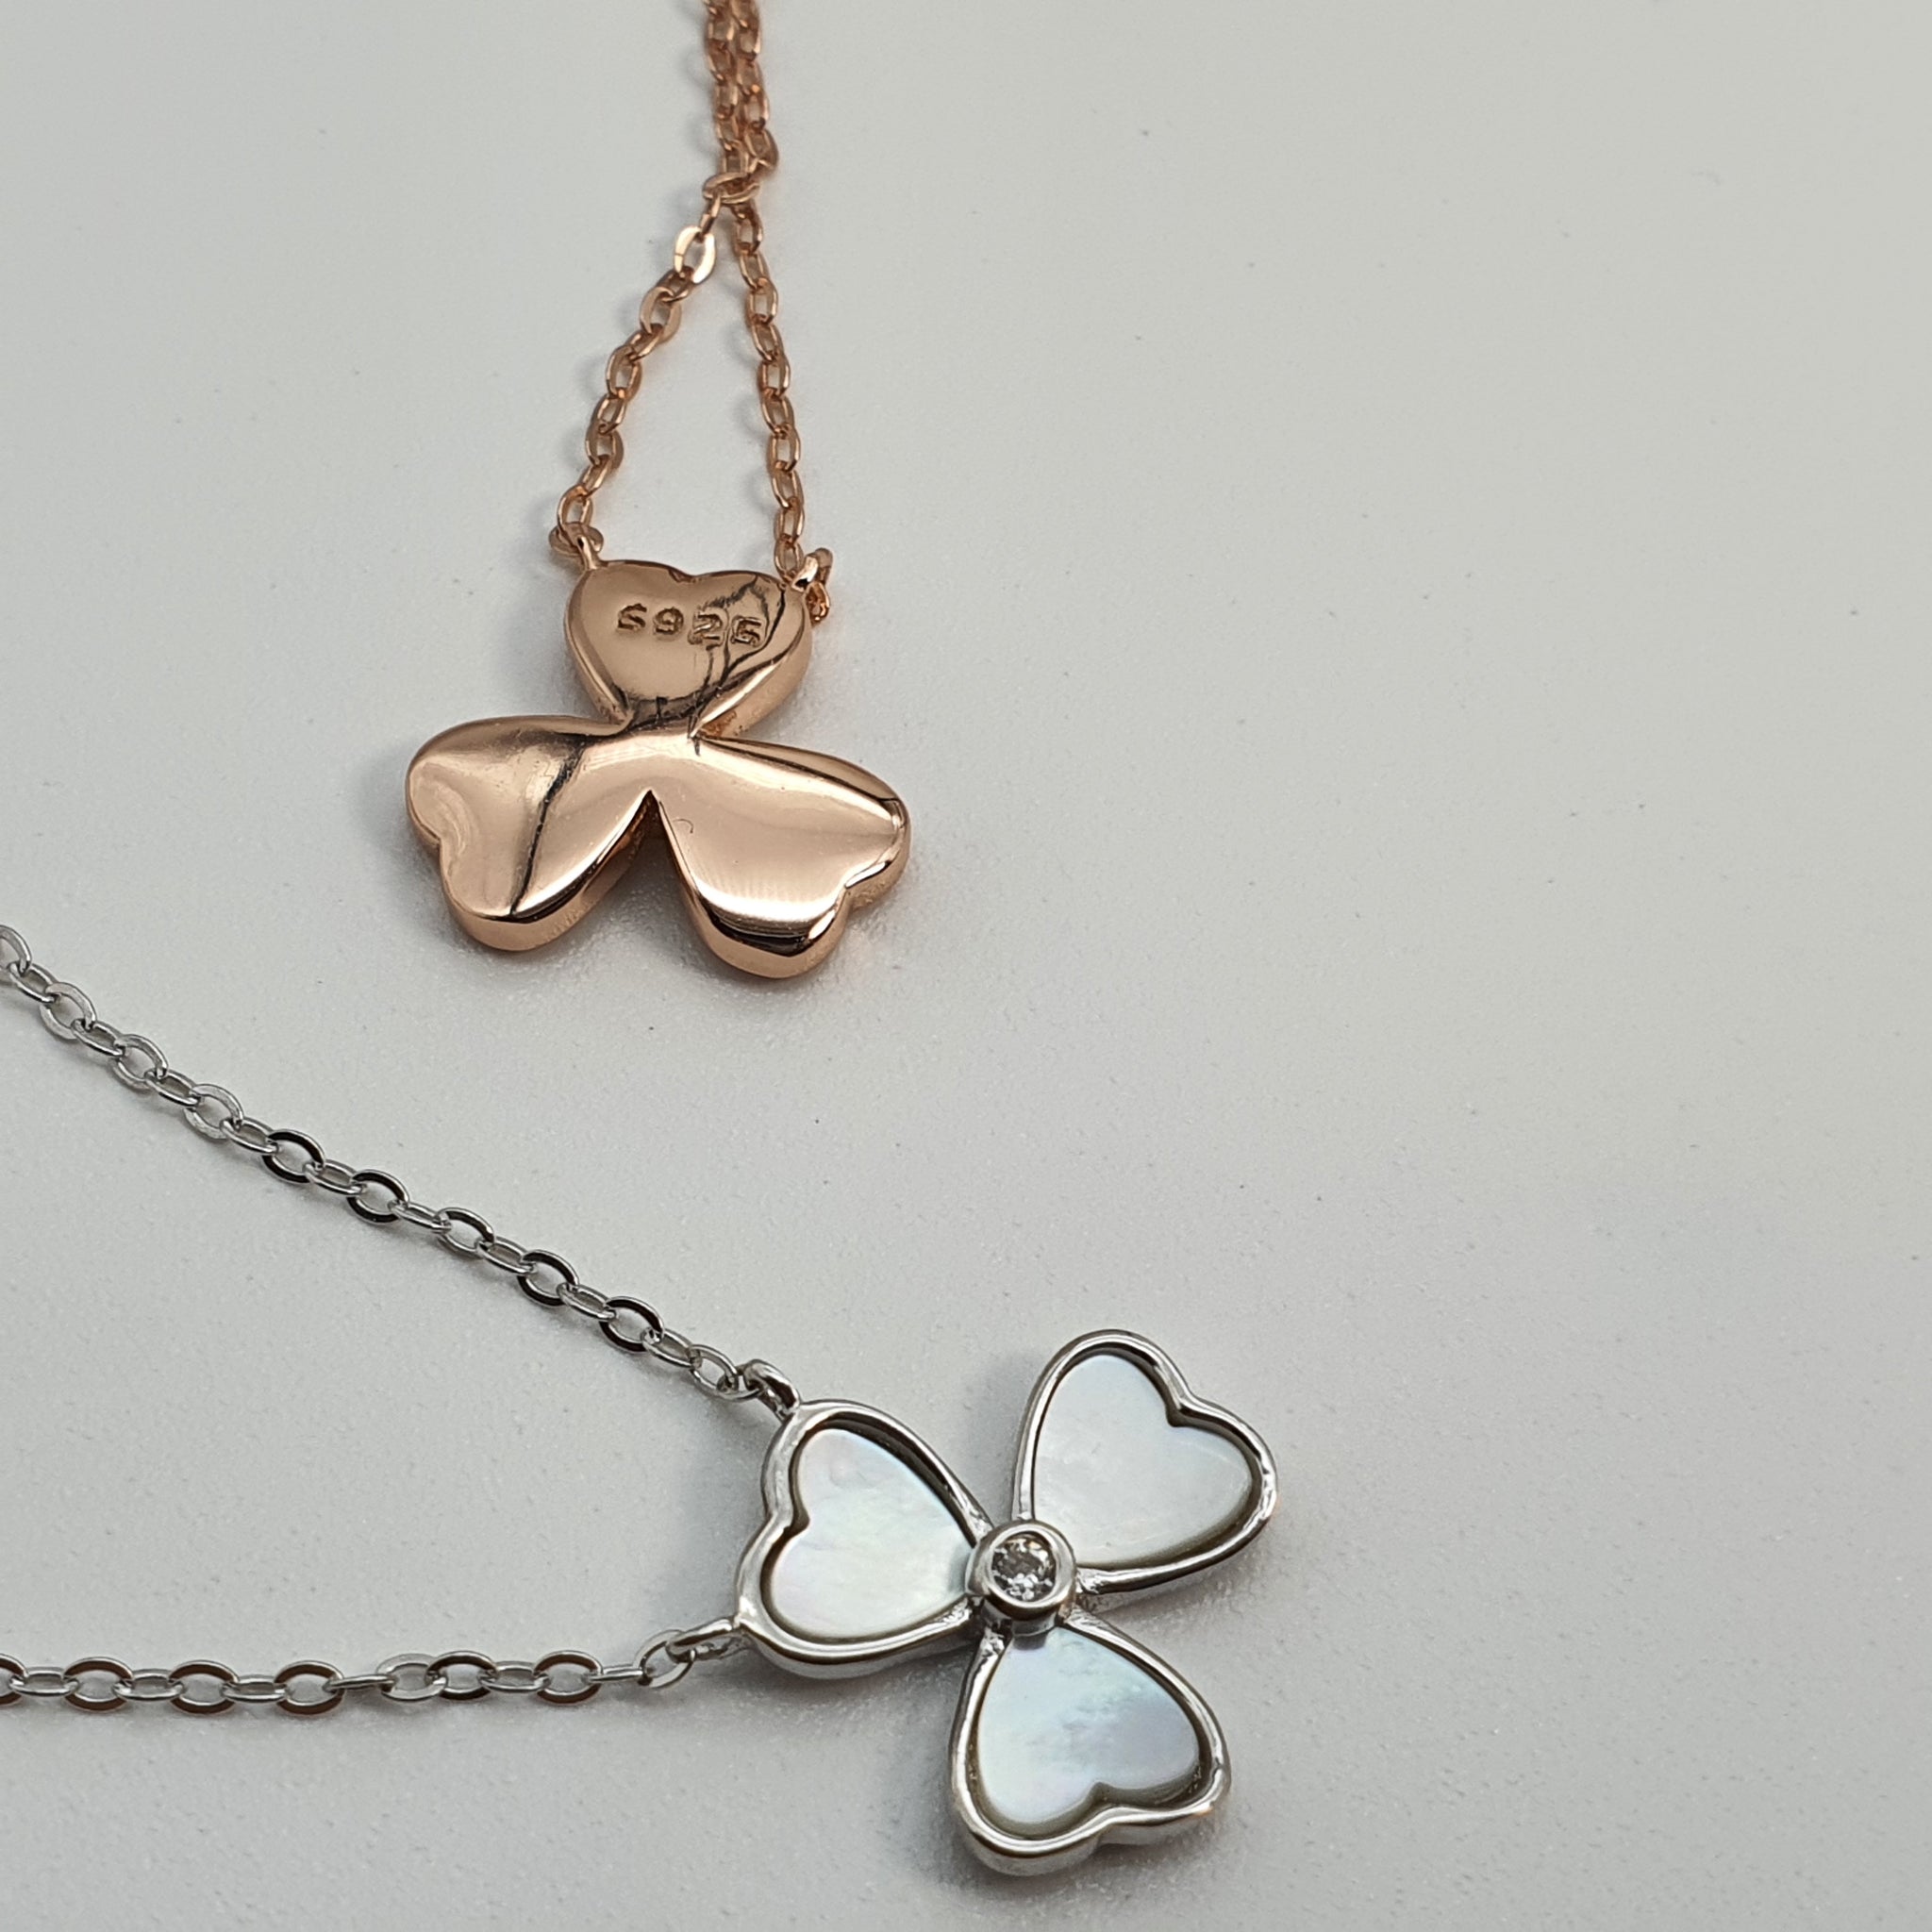 Four-leaf clover necklace - The RuneScape Wiki